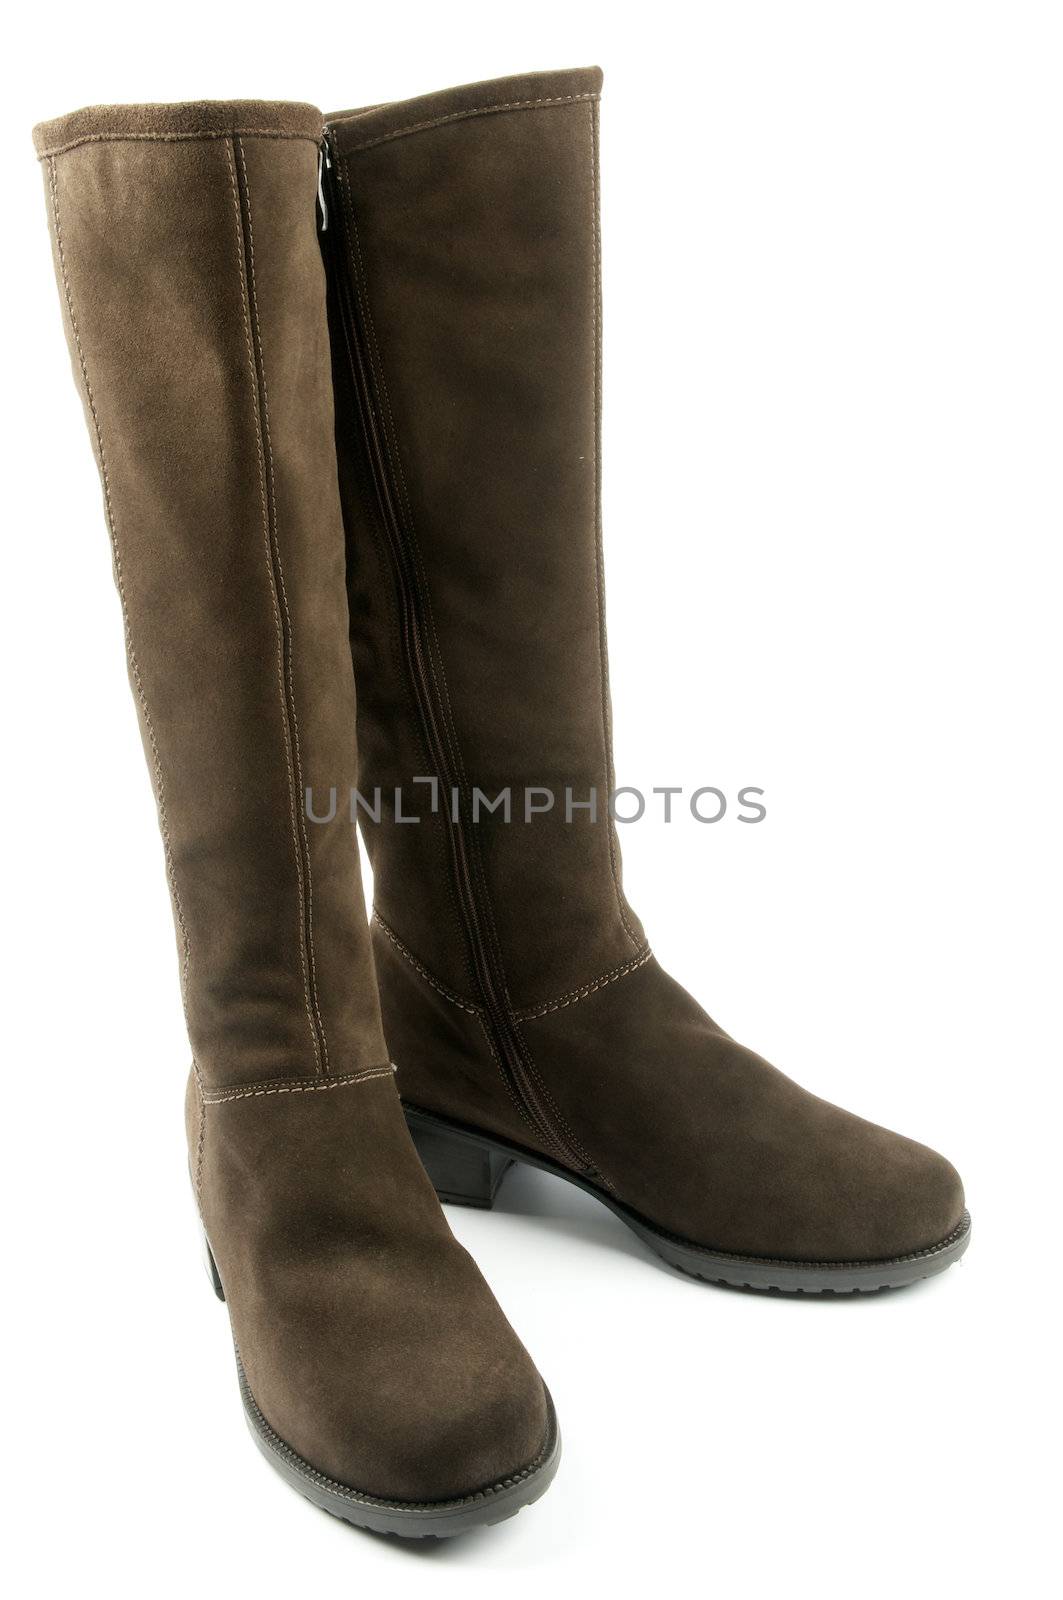 Pair of Brown Female Boots by zhekos